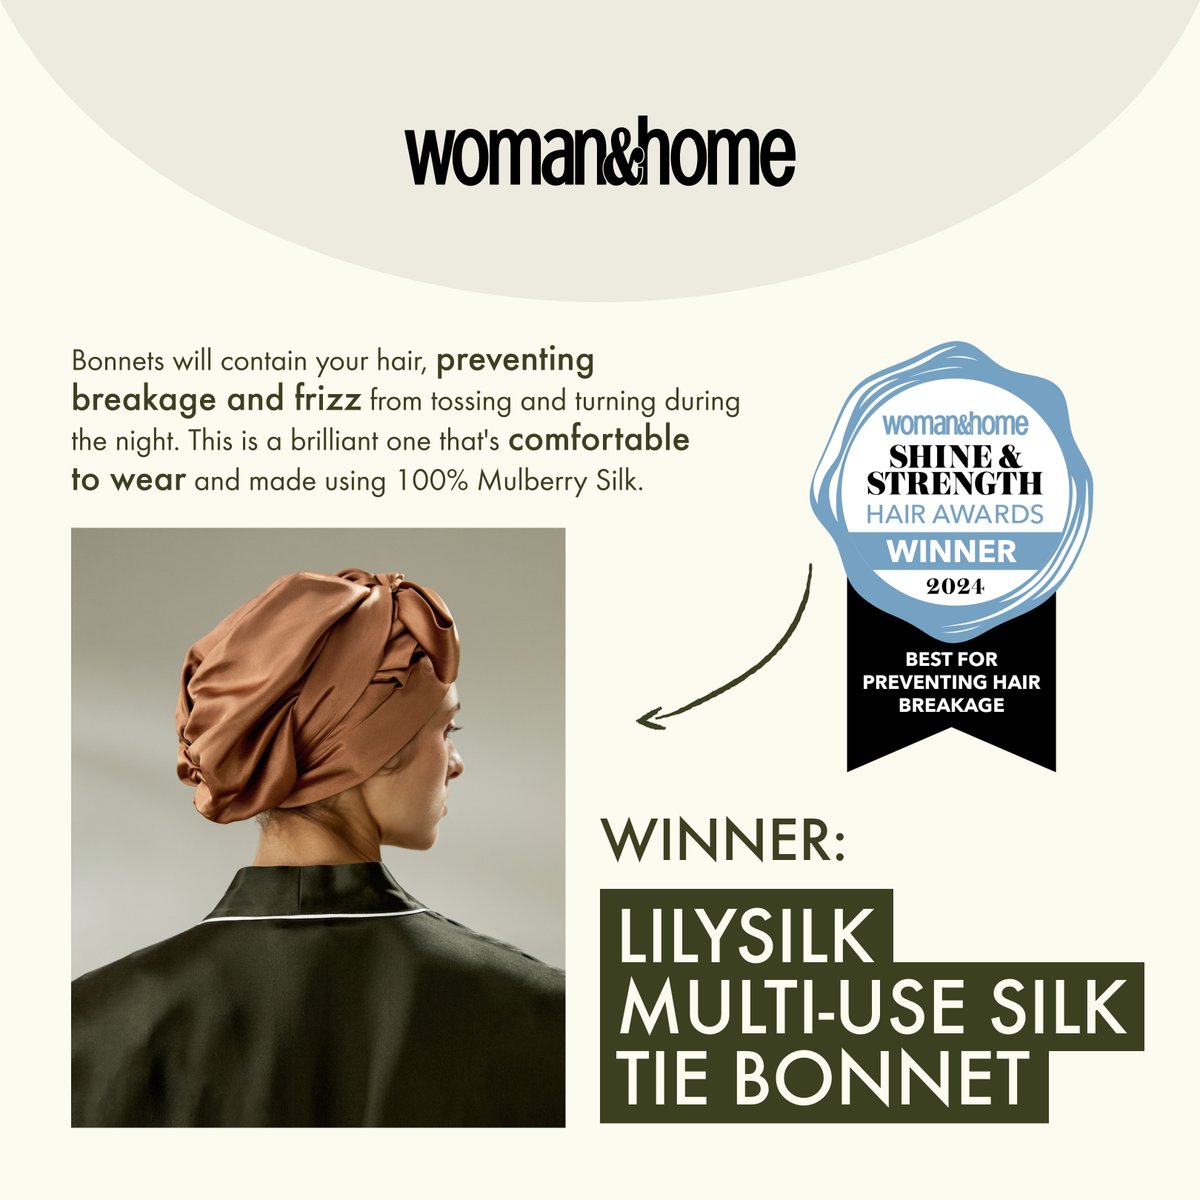 Woman & Home 2024 Shine & Strength Hair Awards Winner!🏆 
We are thrilled to share LILYSILK Multi-Use Silk Tie Bonnet is awarded as the Best for Preventing Hair Breakage! Thank you to the @womanandhome editors and judges for recognizing our product.
#lilysilk #Livespectacularly